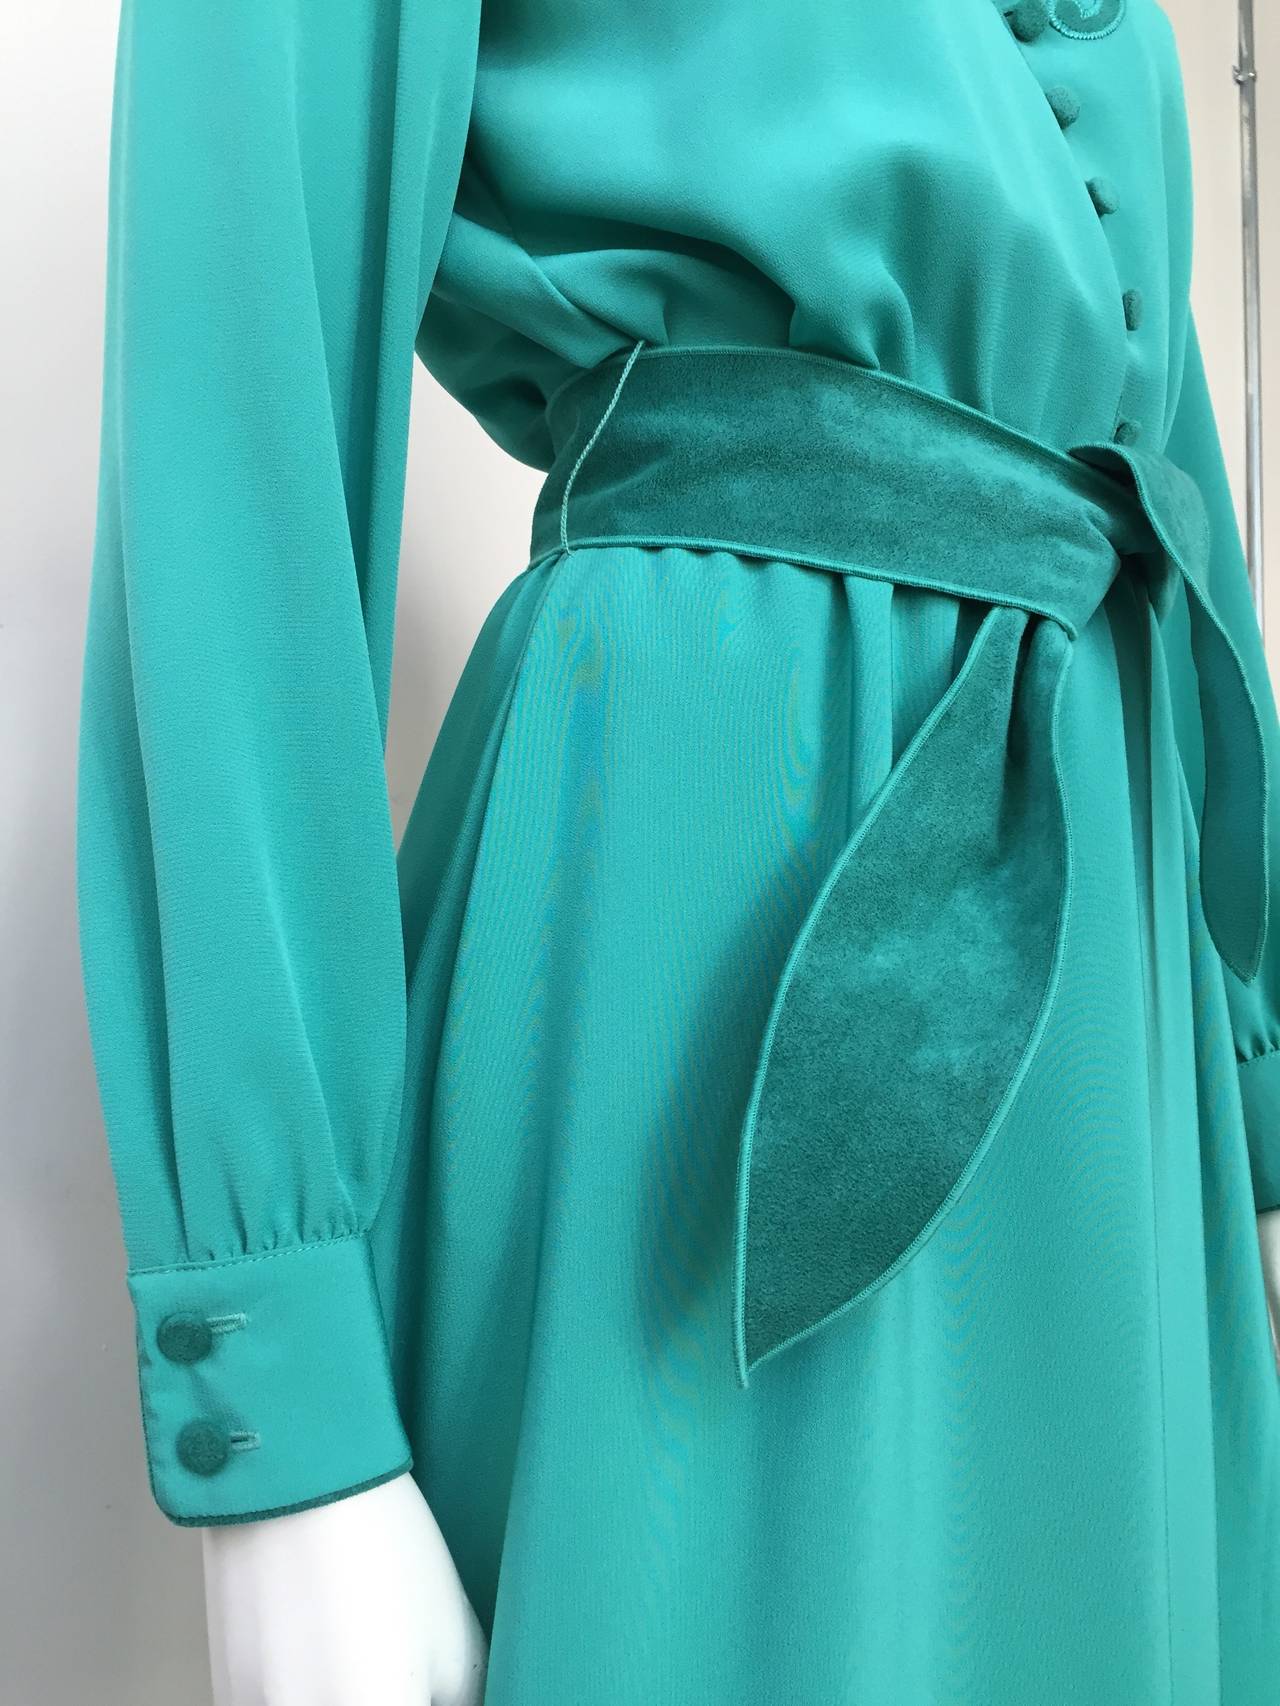 Lilli Ann 1980s Dress with Ultrasuede Trim & Pockets Size 4. In Excellent Condition For Sale In Atlanta, GA